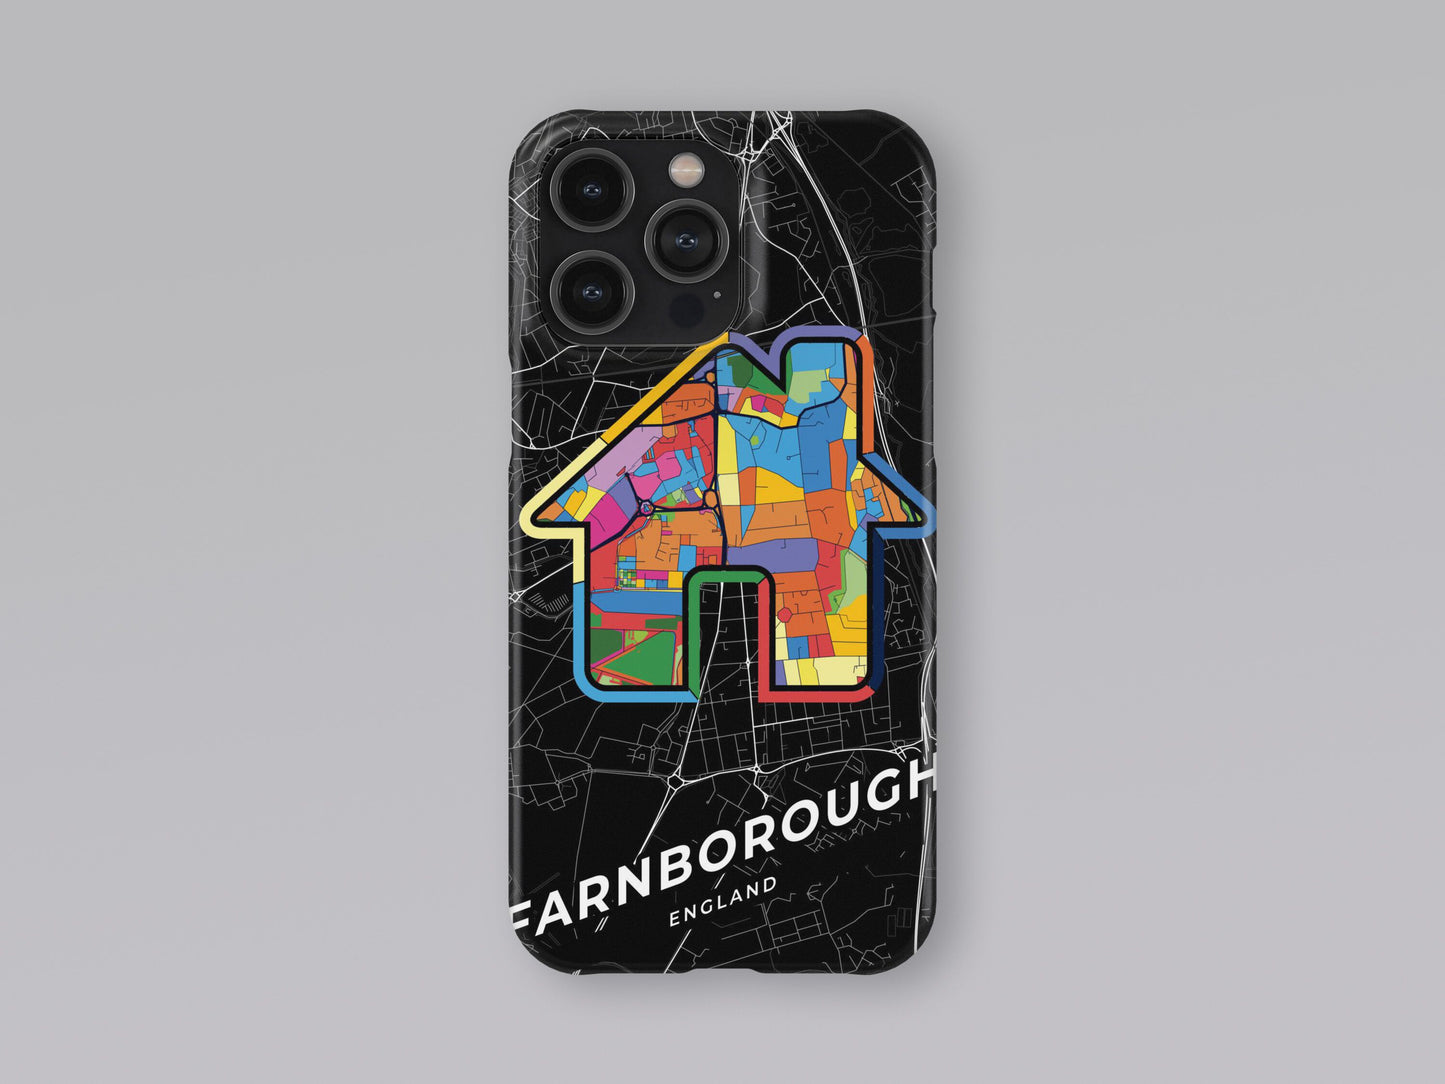 Farnborough England slim phone case with colorful icon. Birthday, wedding or housewarming gift. Couple match cases. 3